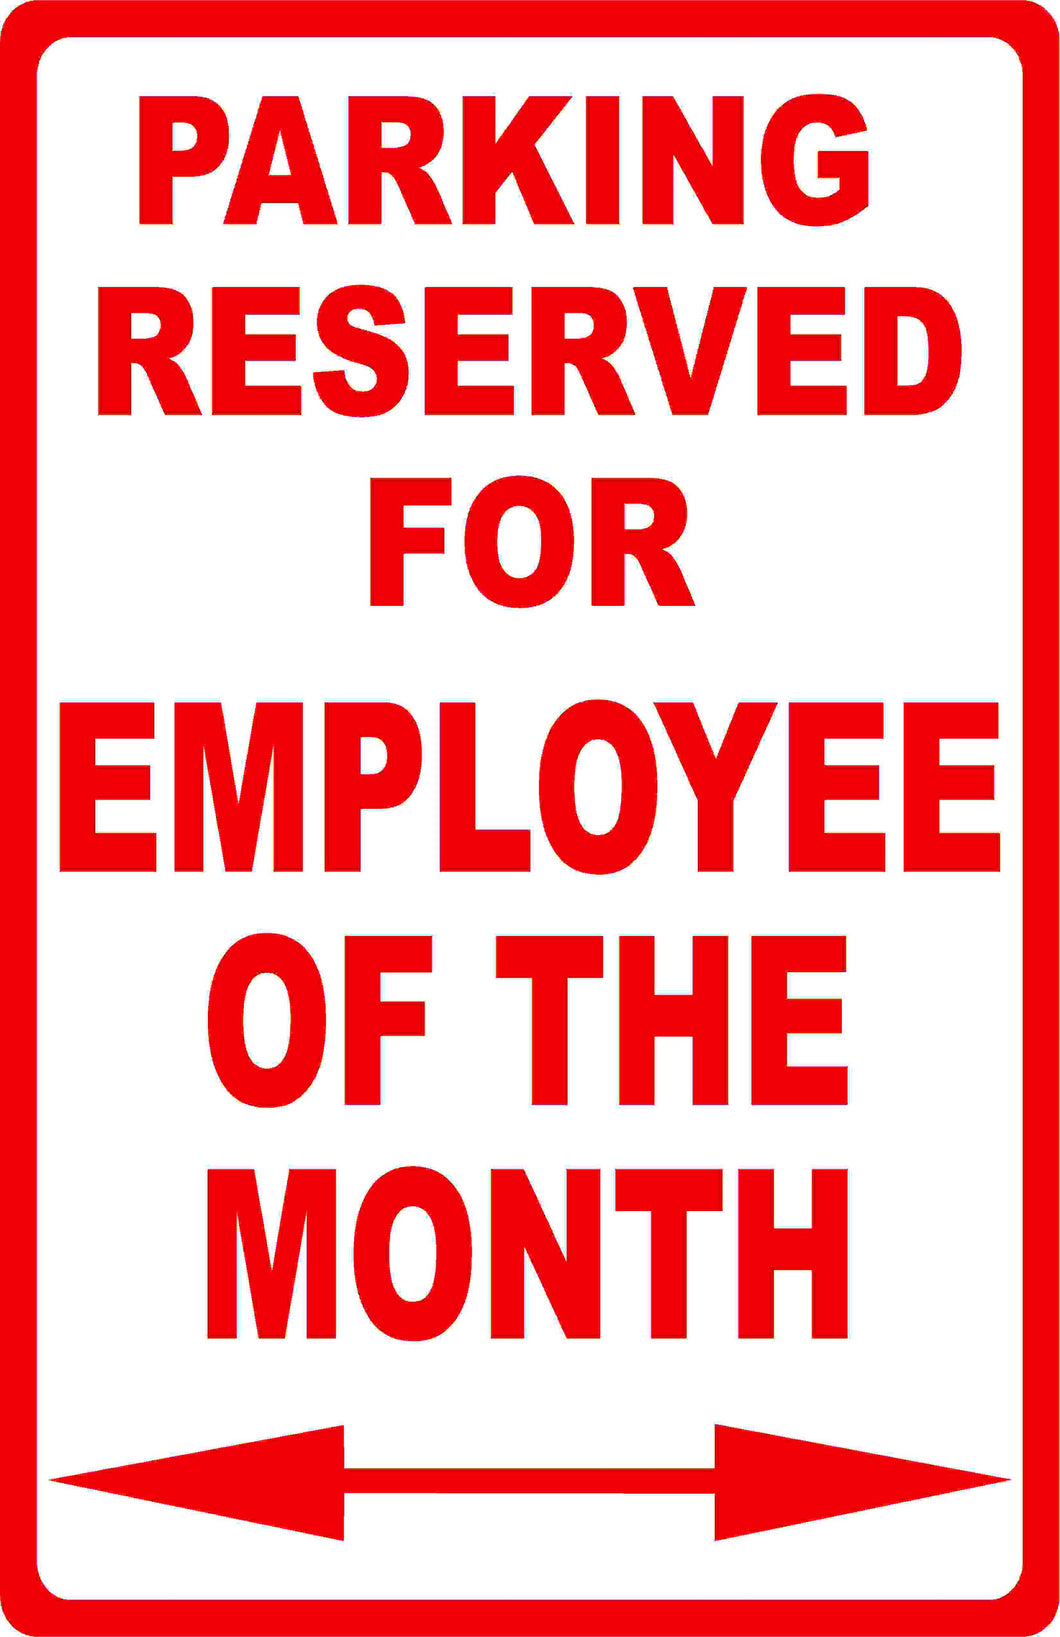 Parking Reserved for Employee of the Month Sign - Signs & Decals by SalaGraphics